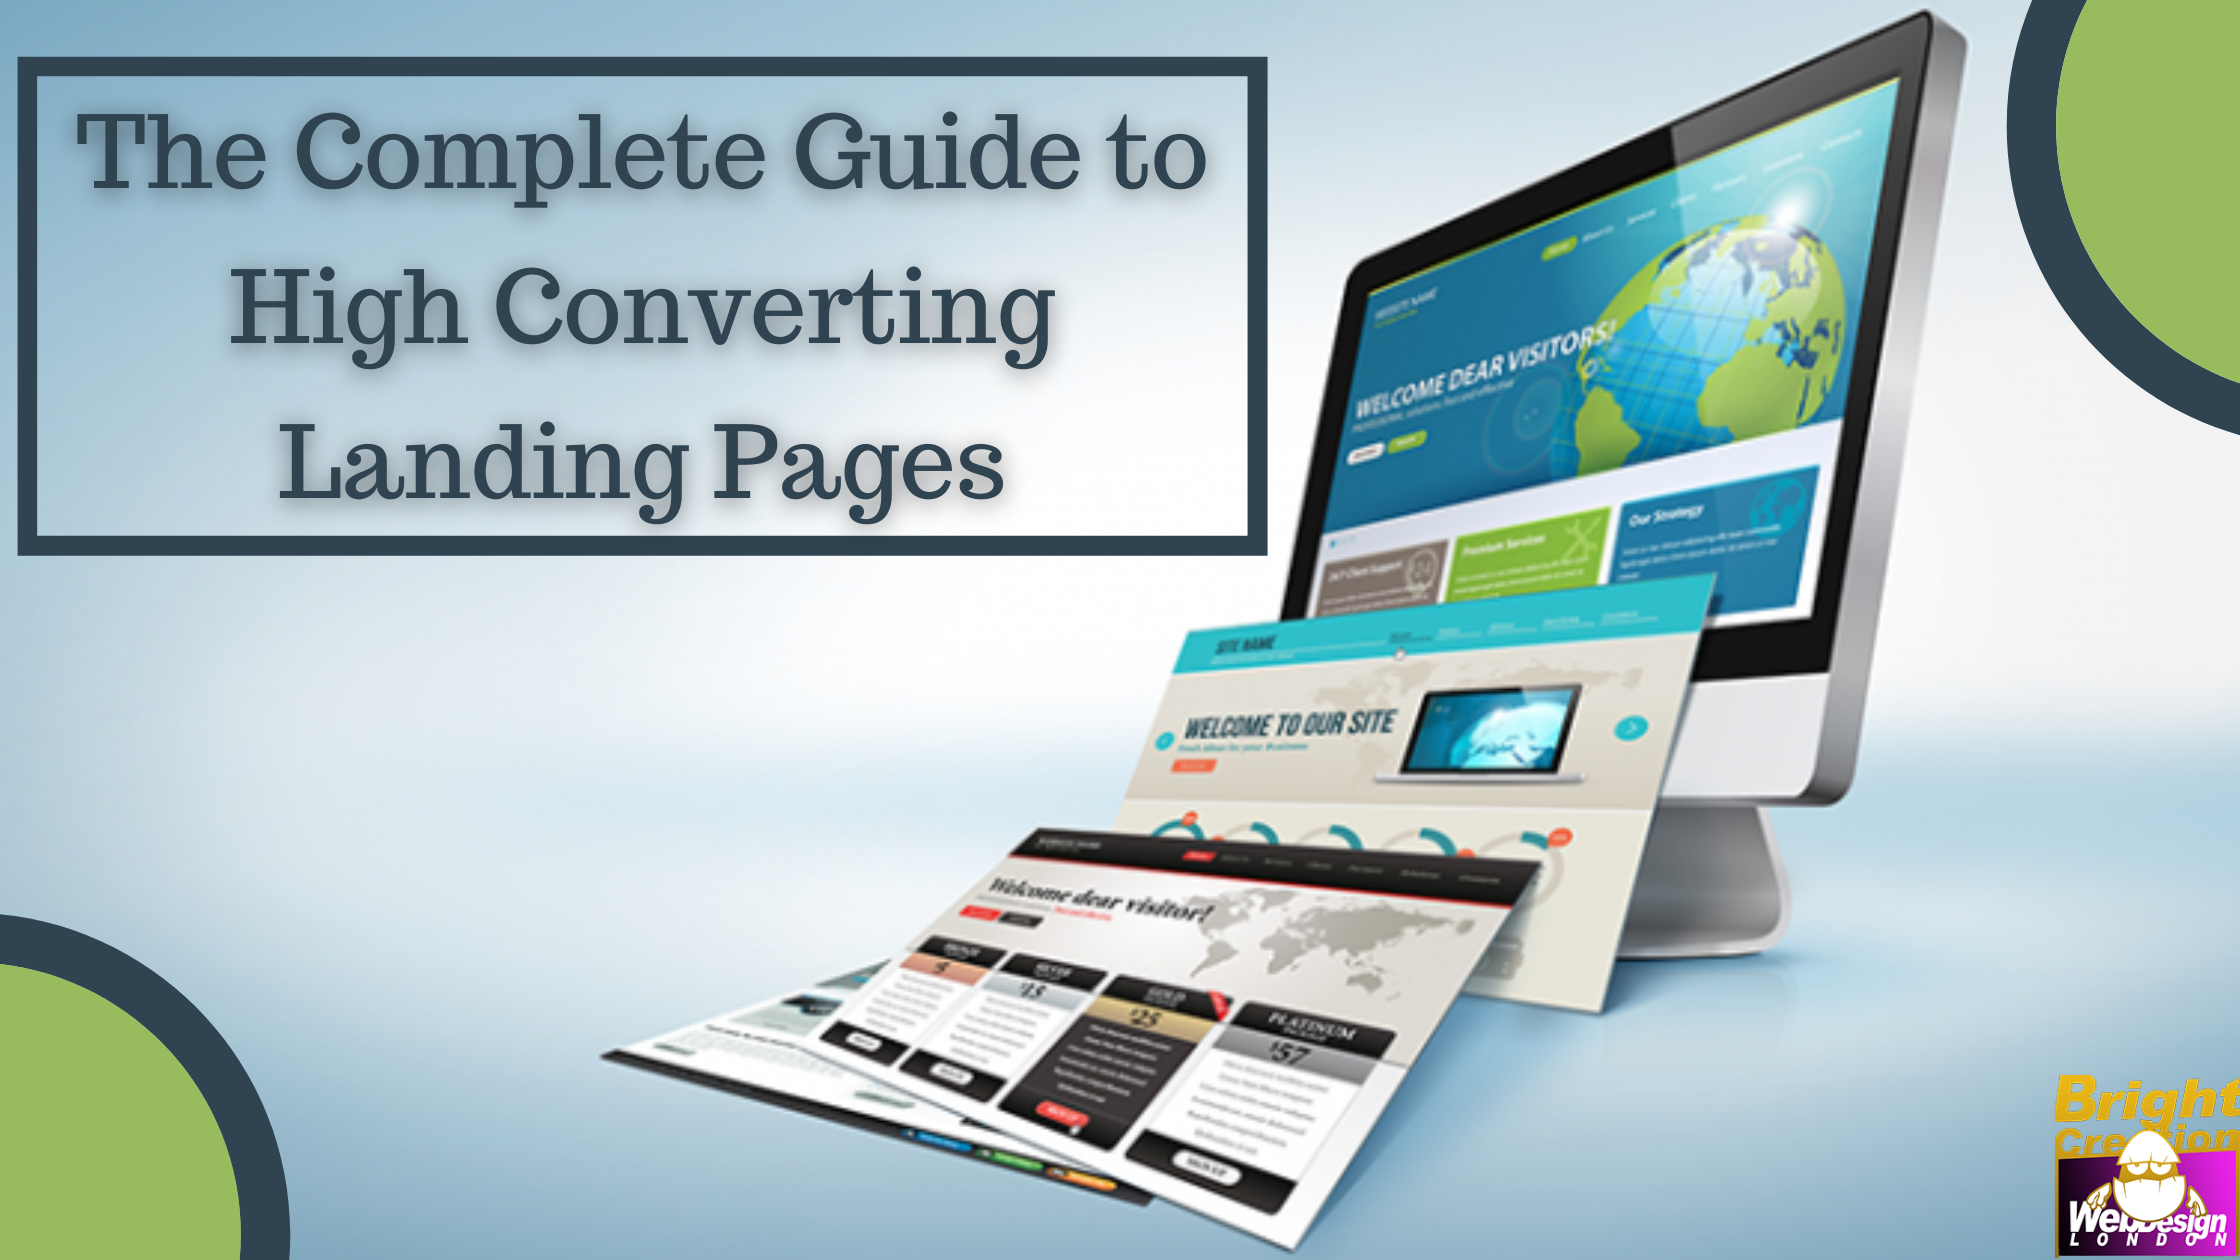 The Complete Guide to High Converting Landing Pages